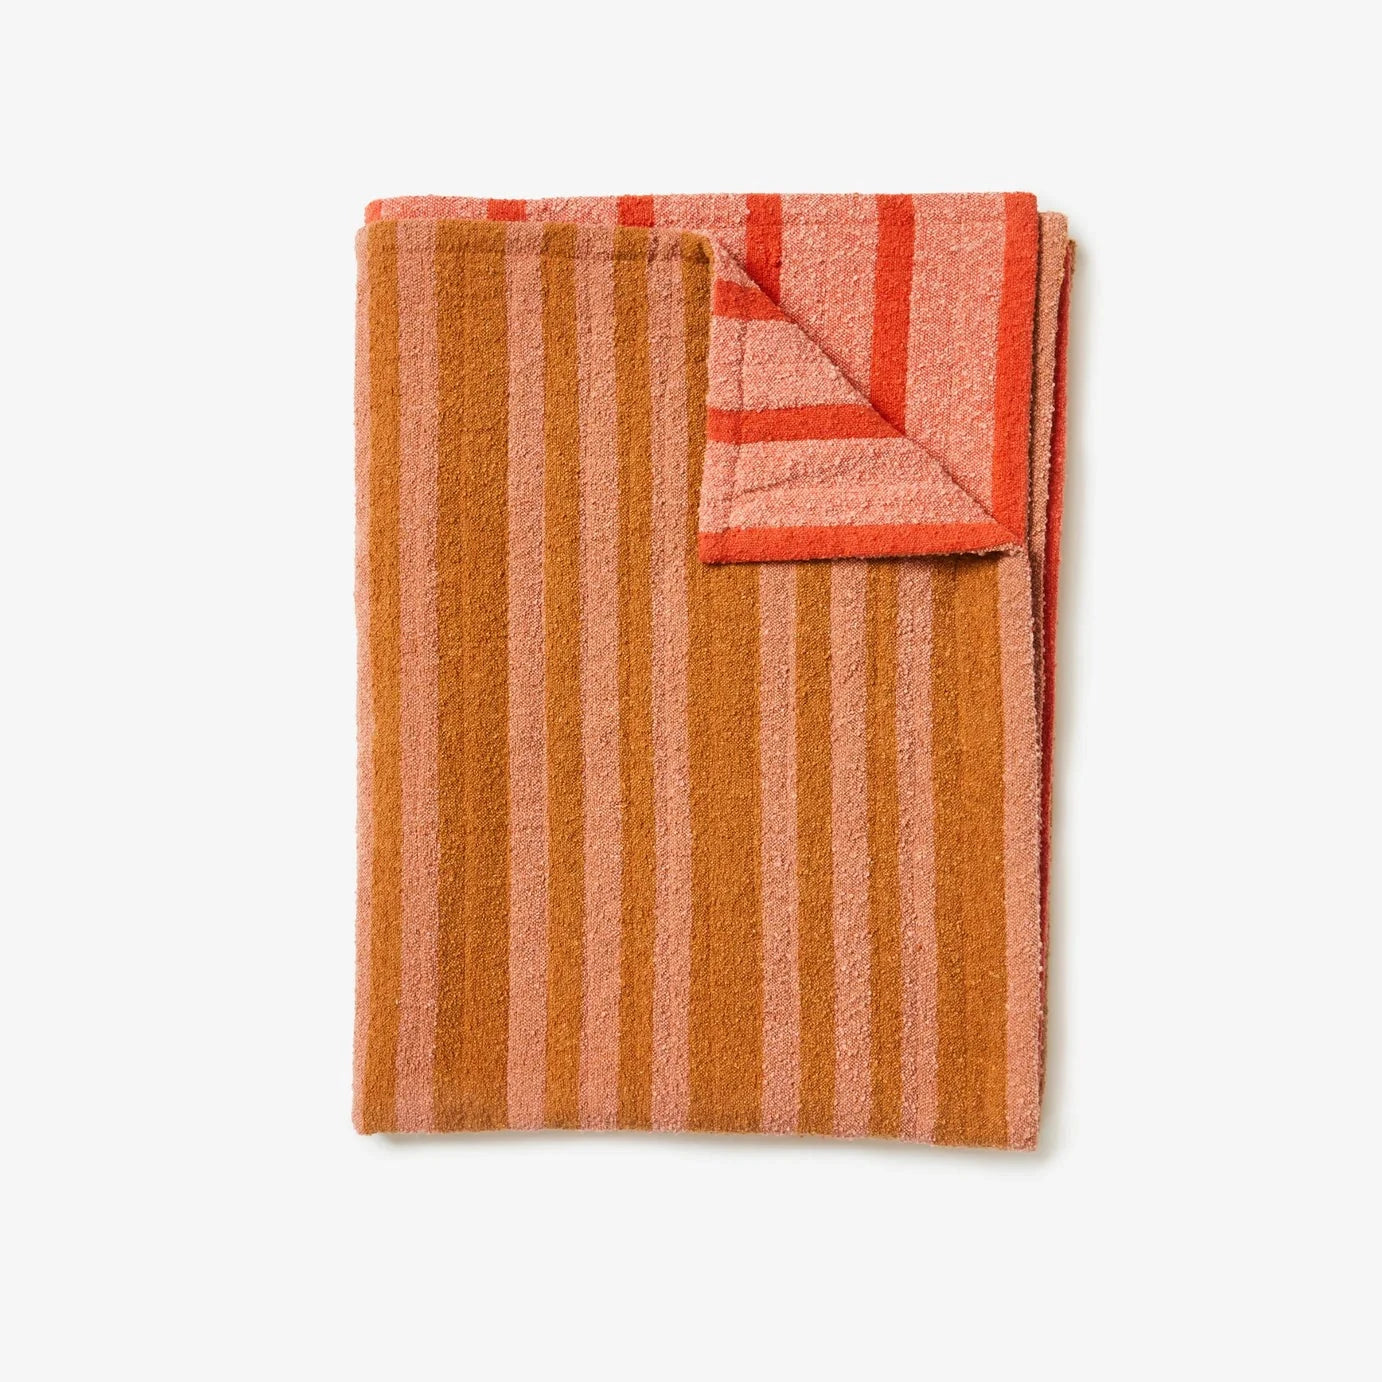 BONNIE AND NEIL STRIPE BOUCLE THROW: RED PINK